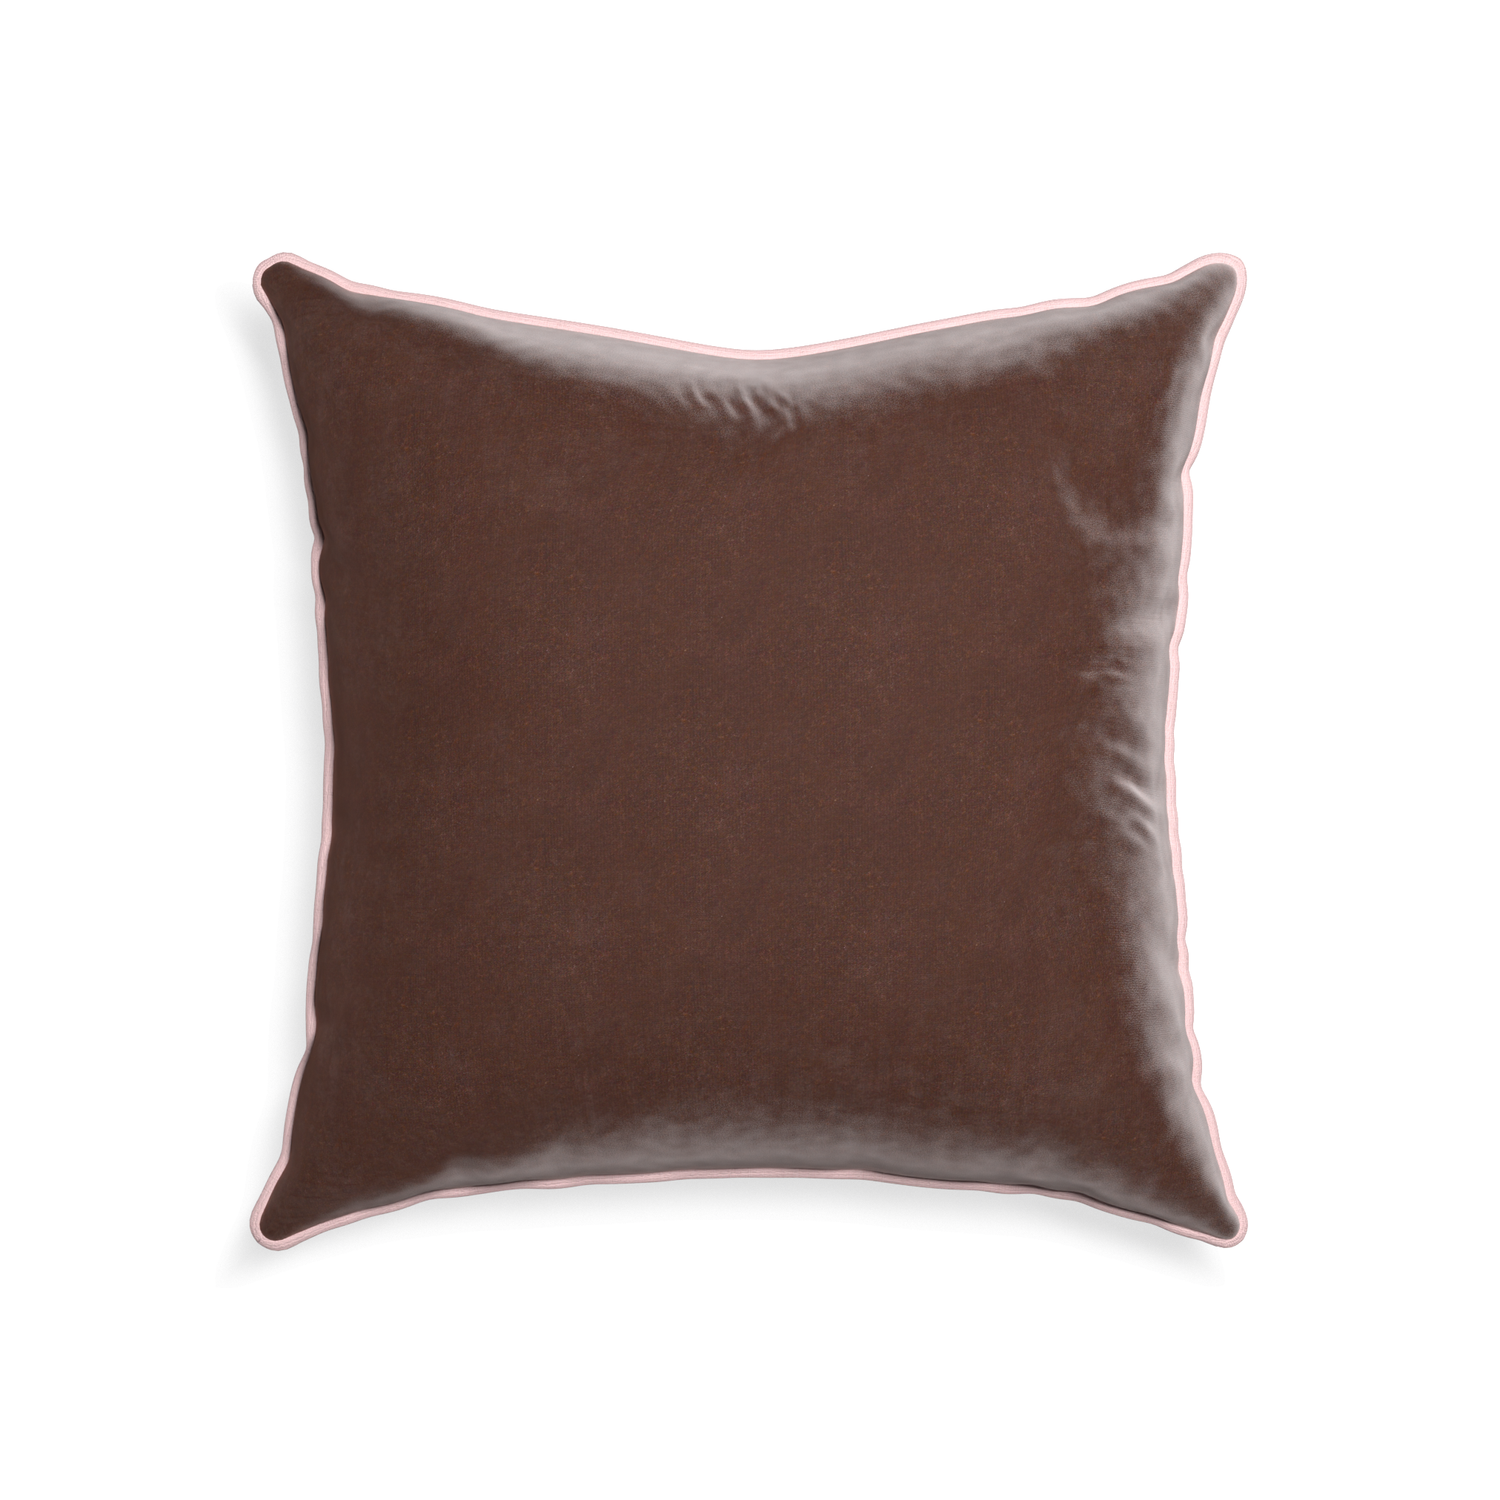 square brown velvet pillow with light pink piping